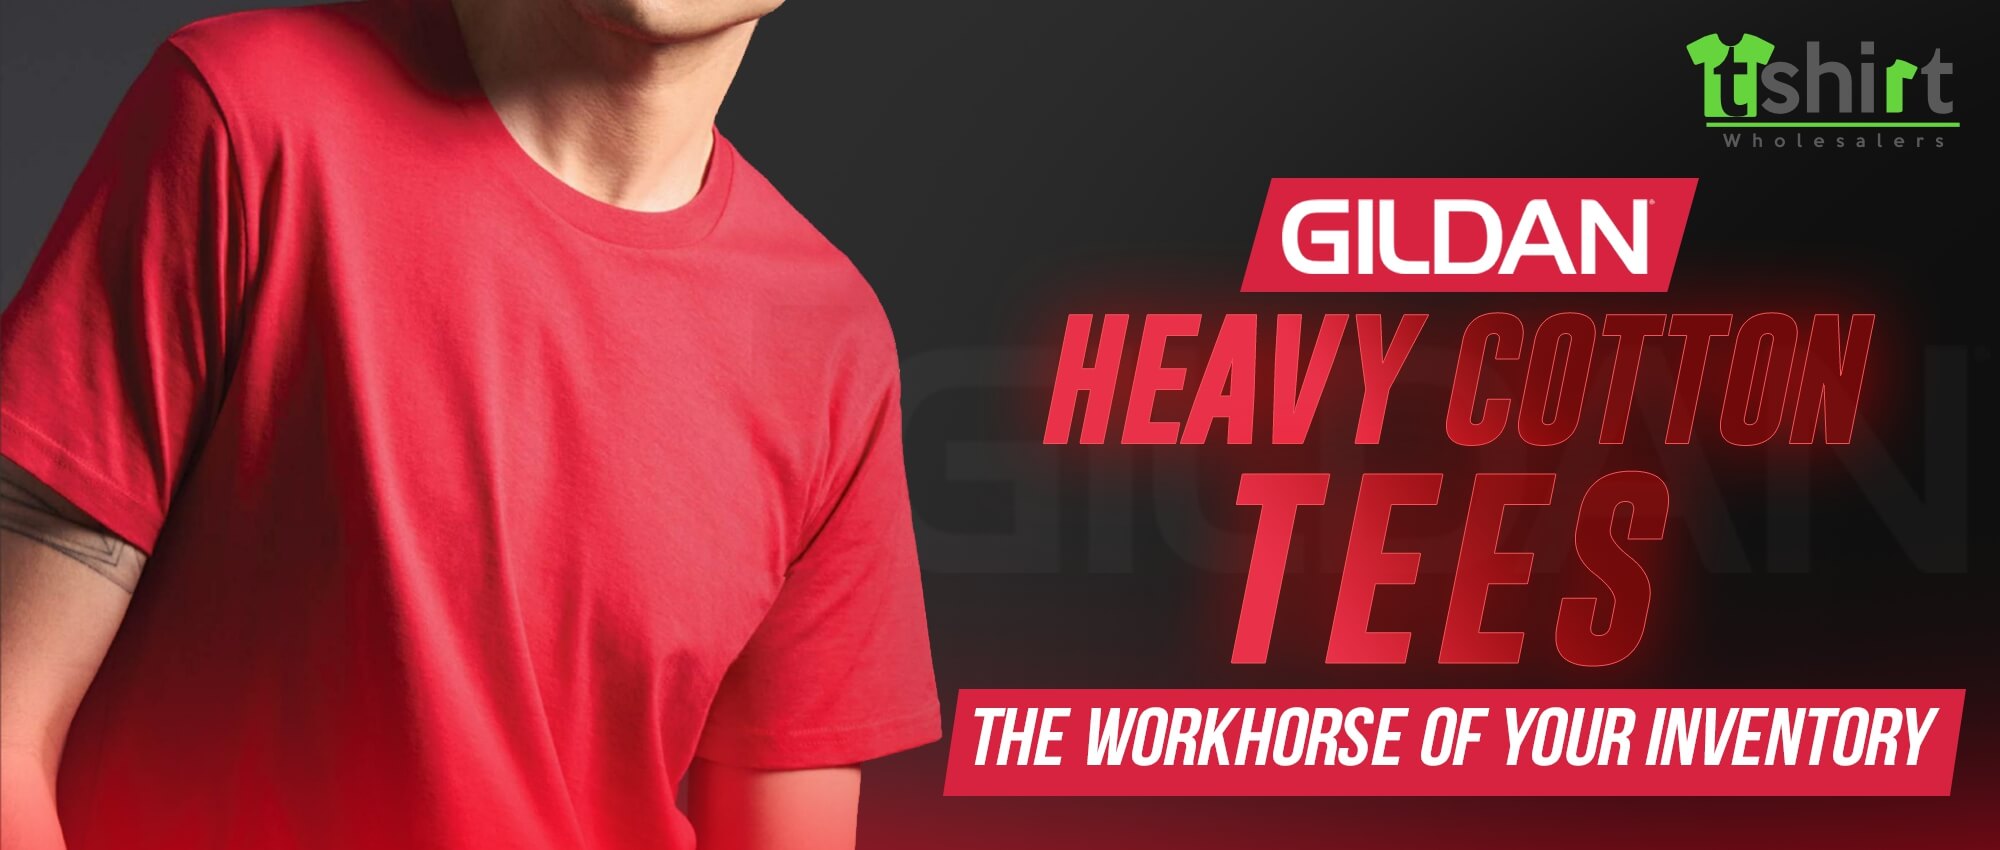 GILDEN HEAVY COTTON TEES - THE WORKHORSE OF YOUR INVENTORY